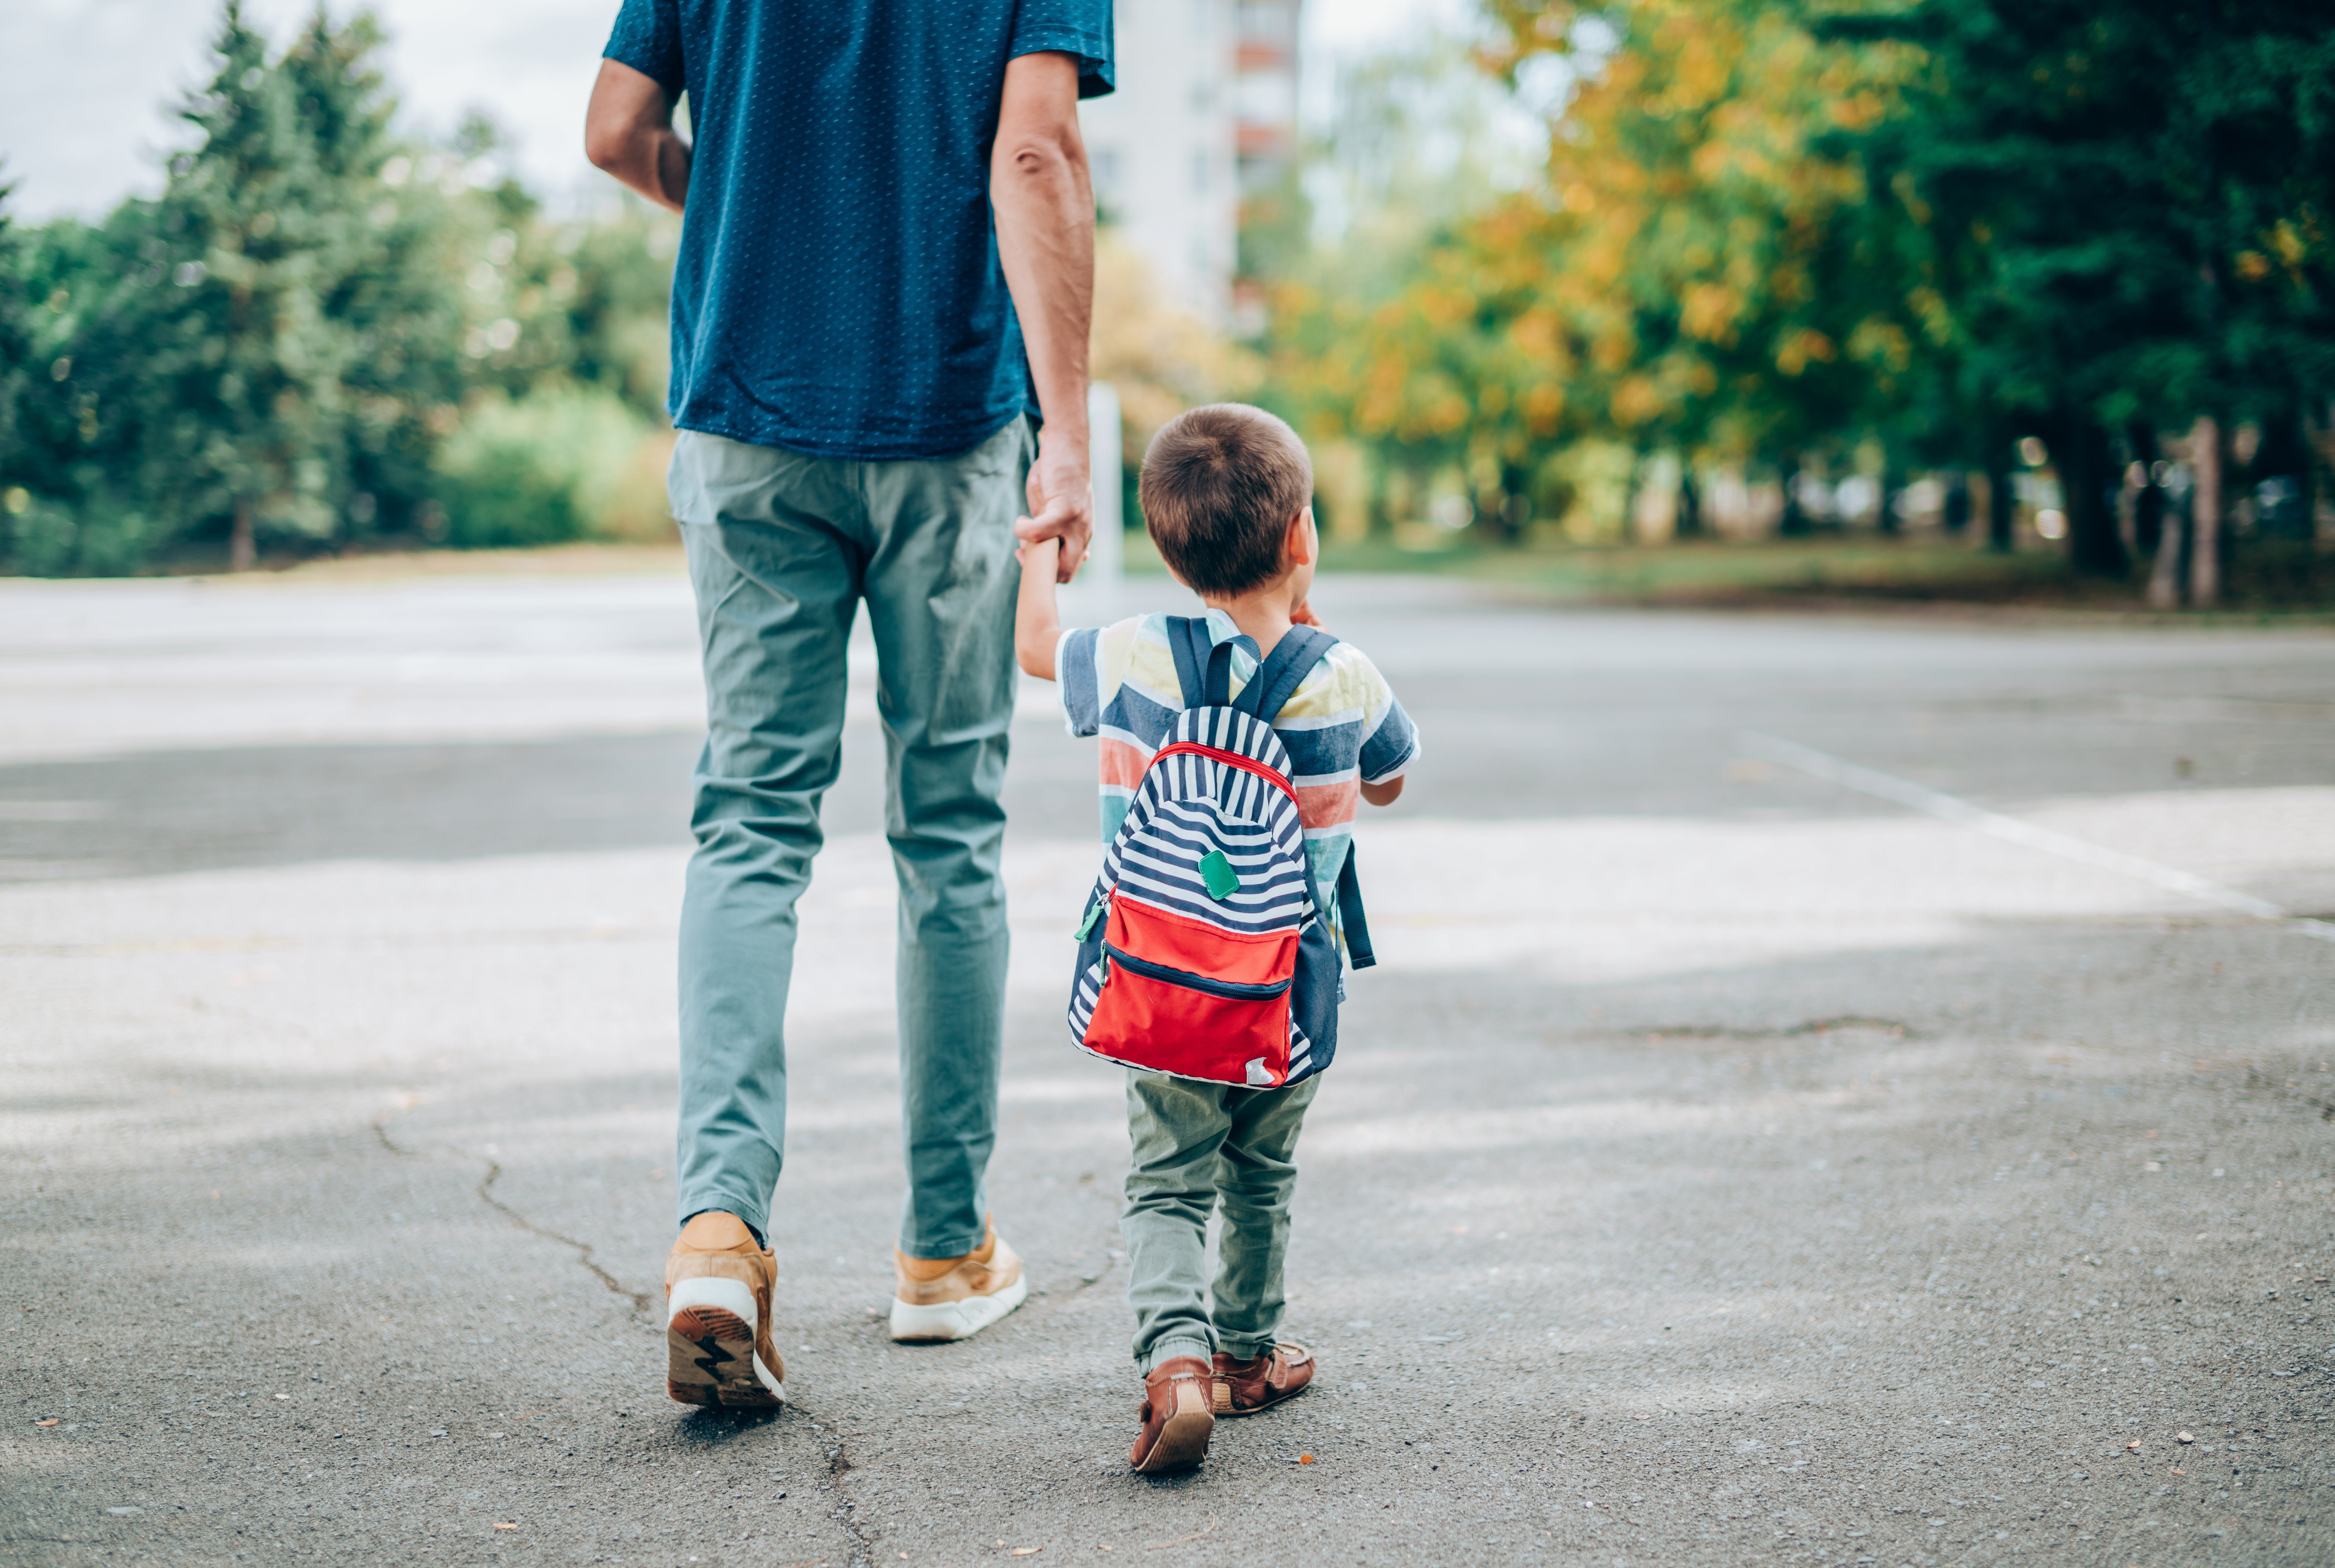 This Father’s Day, we’d like to call on your readers to celebrate and thank those who take on non-traditional parenting roles